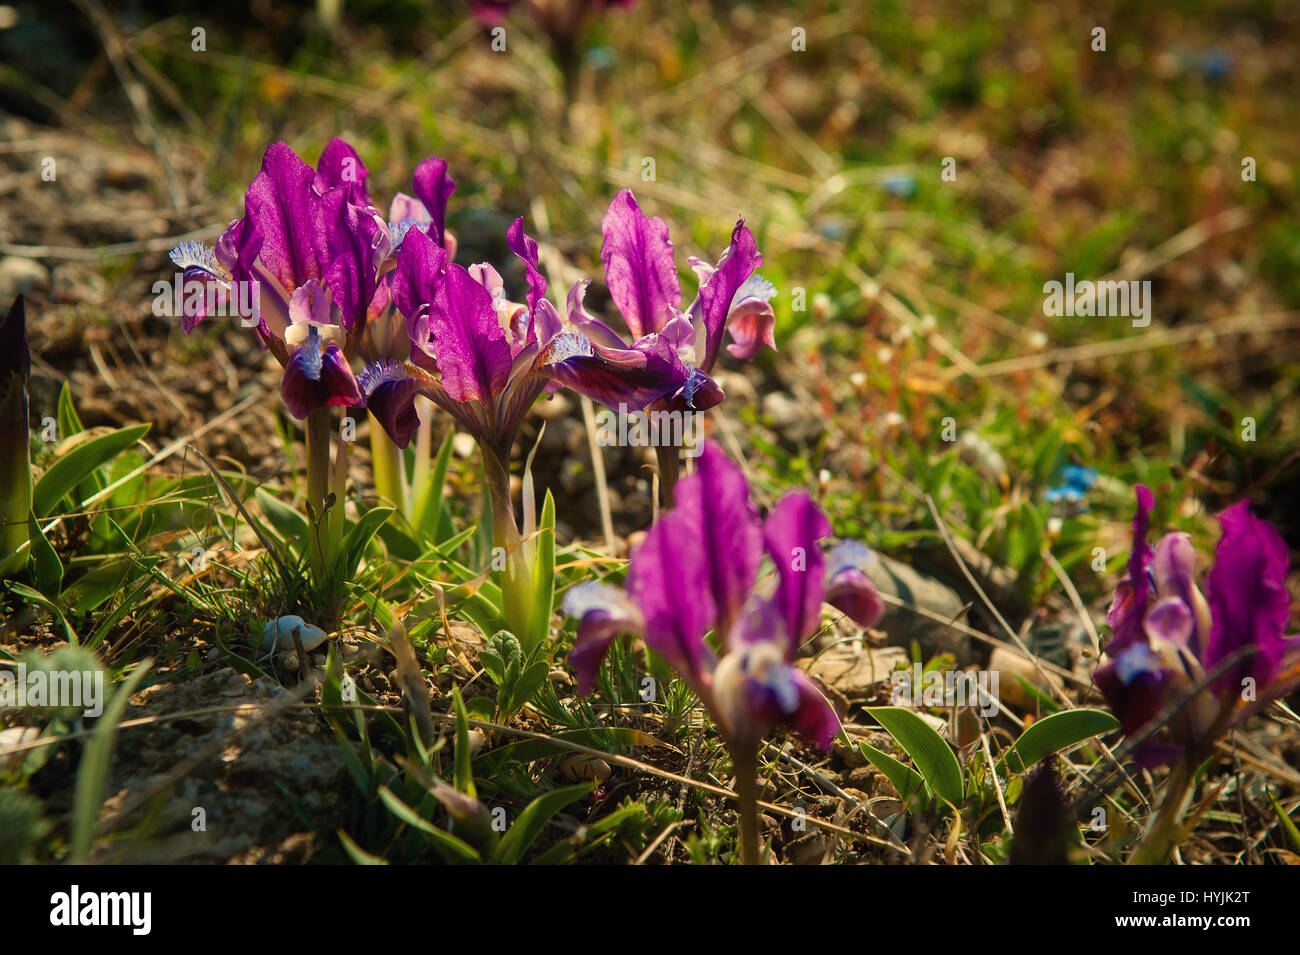 A background of bright spring grass and small wild purple irises. Stock Photo